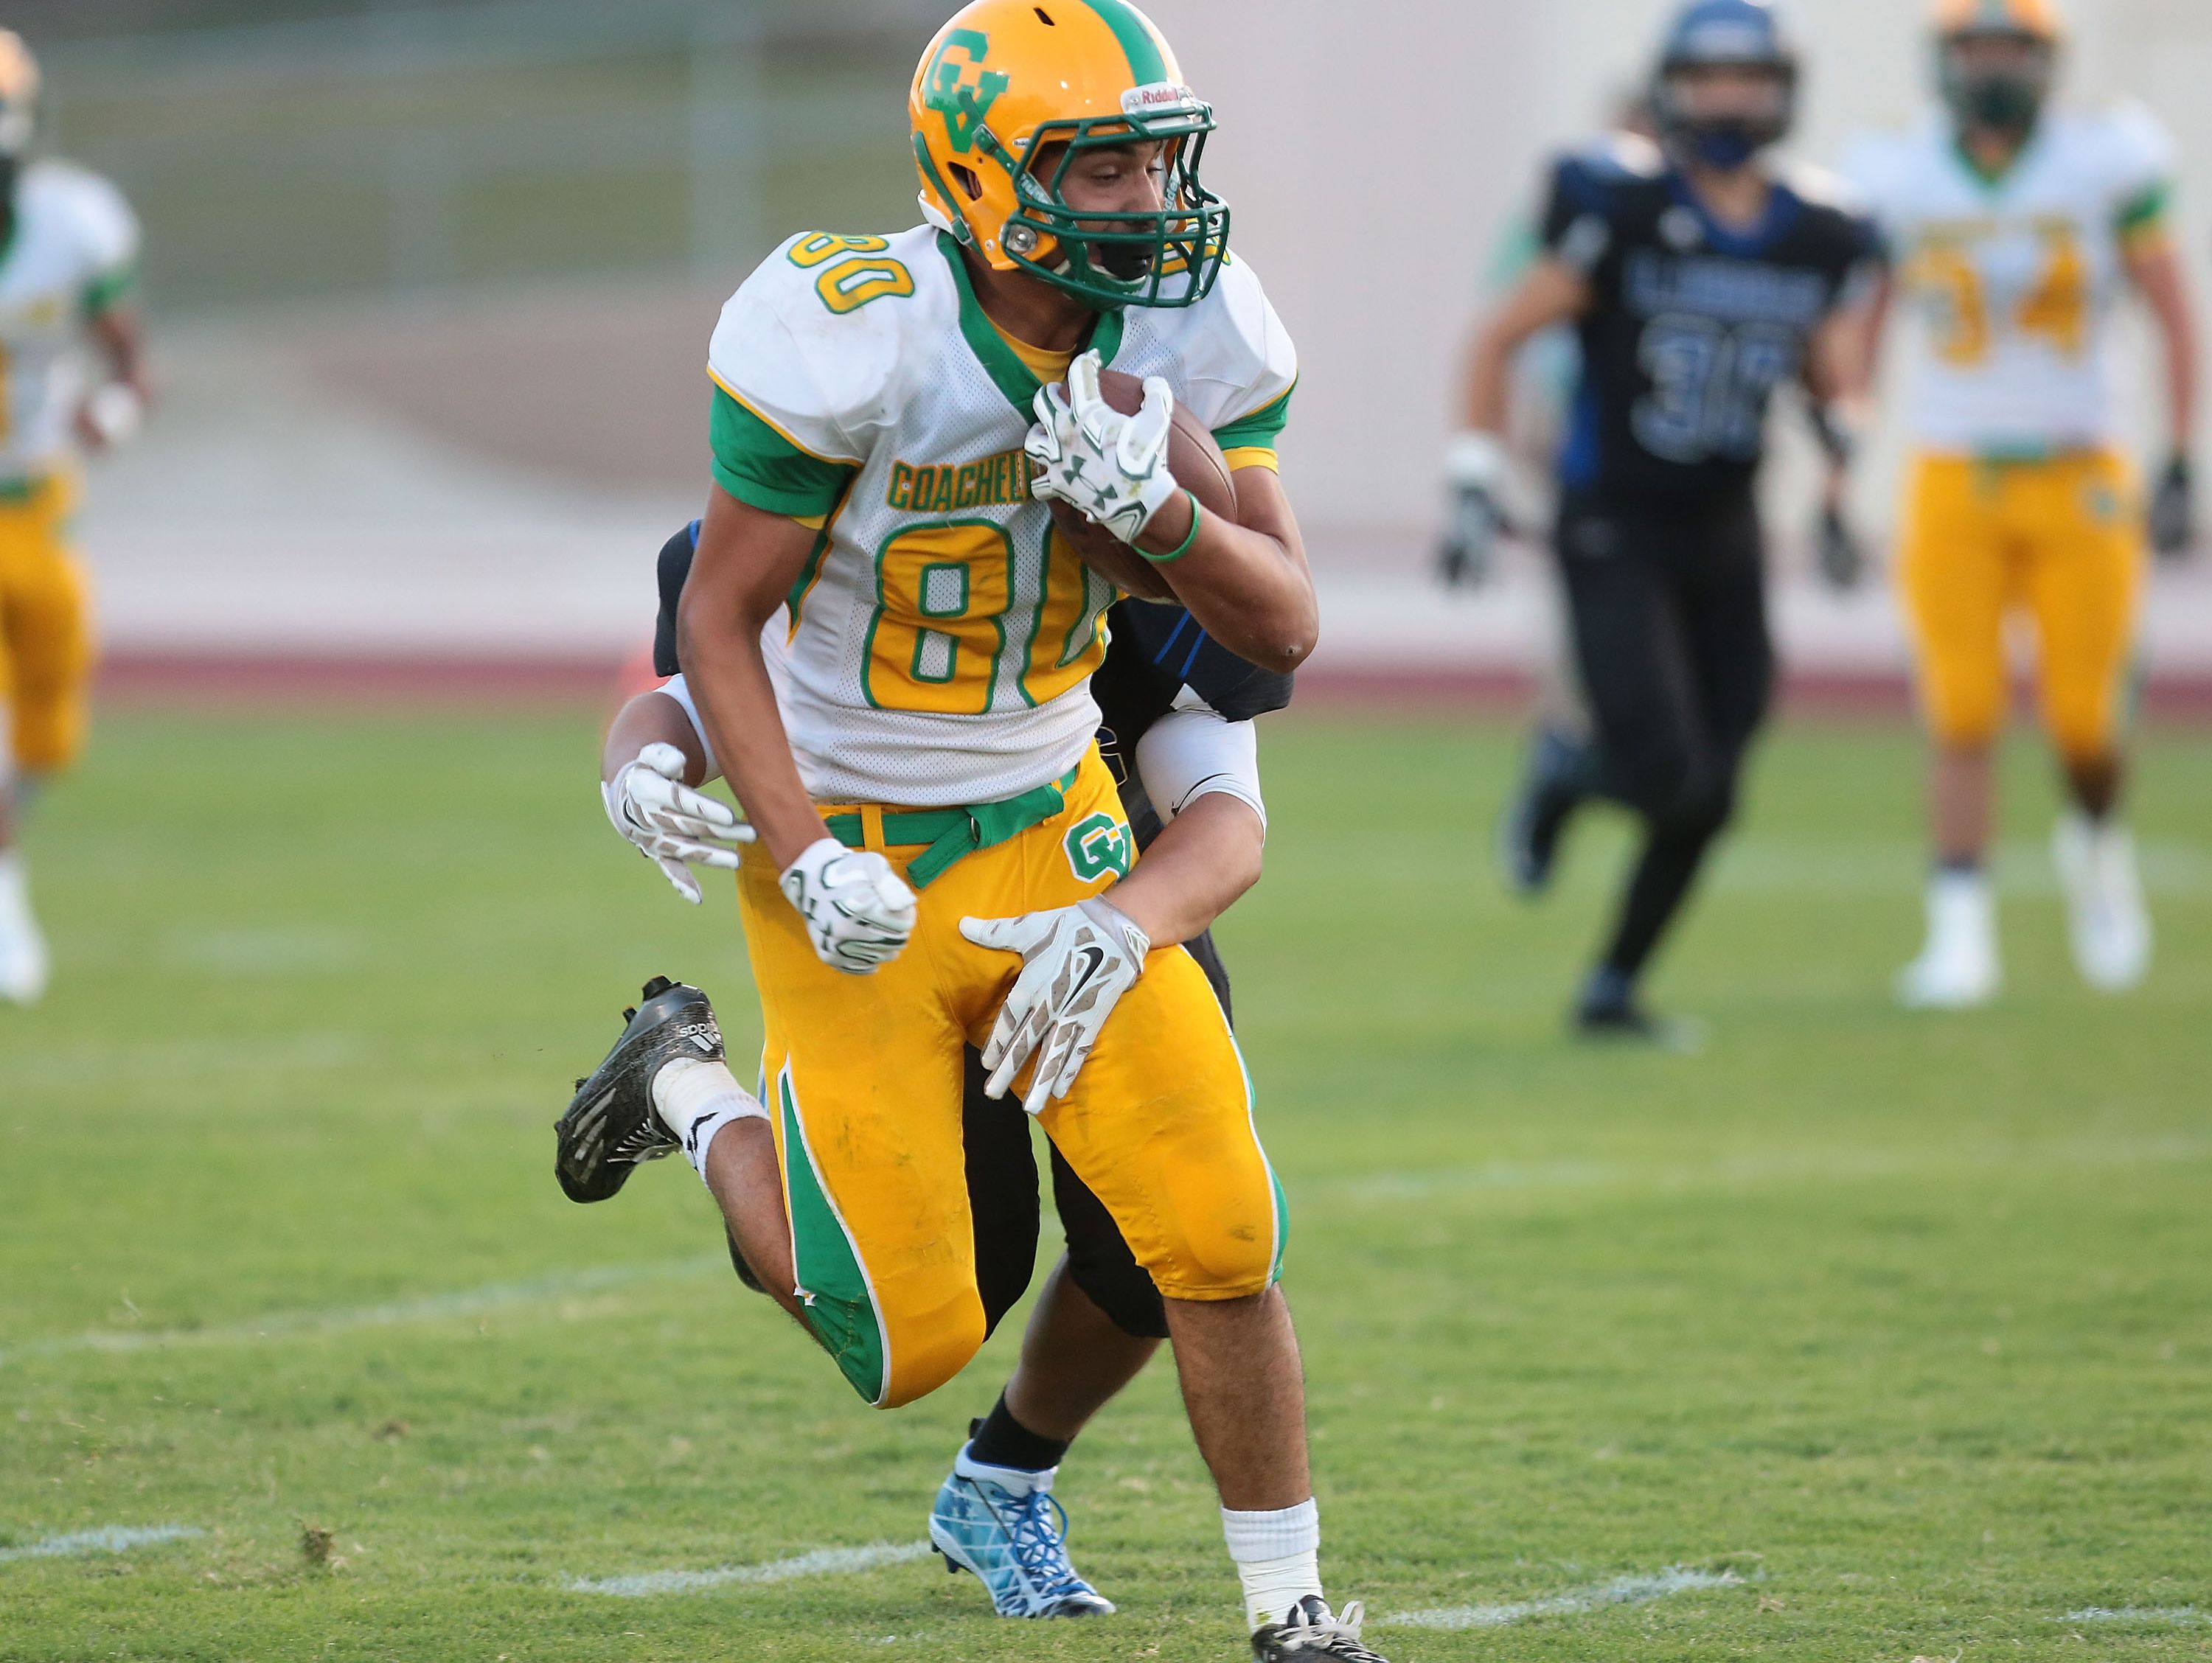 Jacob Salazar picks up a first down for Coachella Valley against Cathedral City, August 26, 2016.